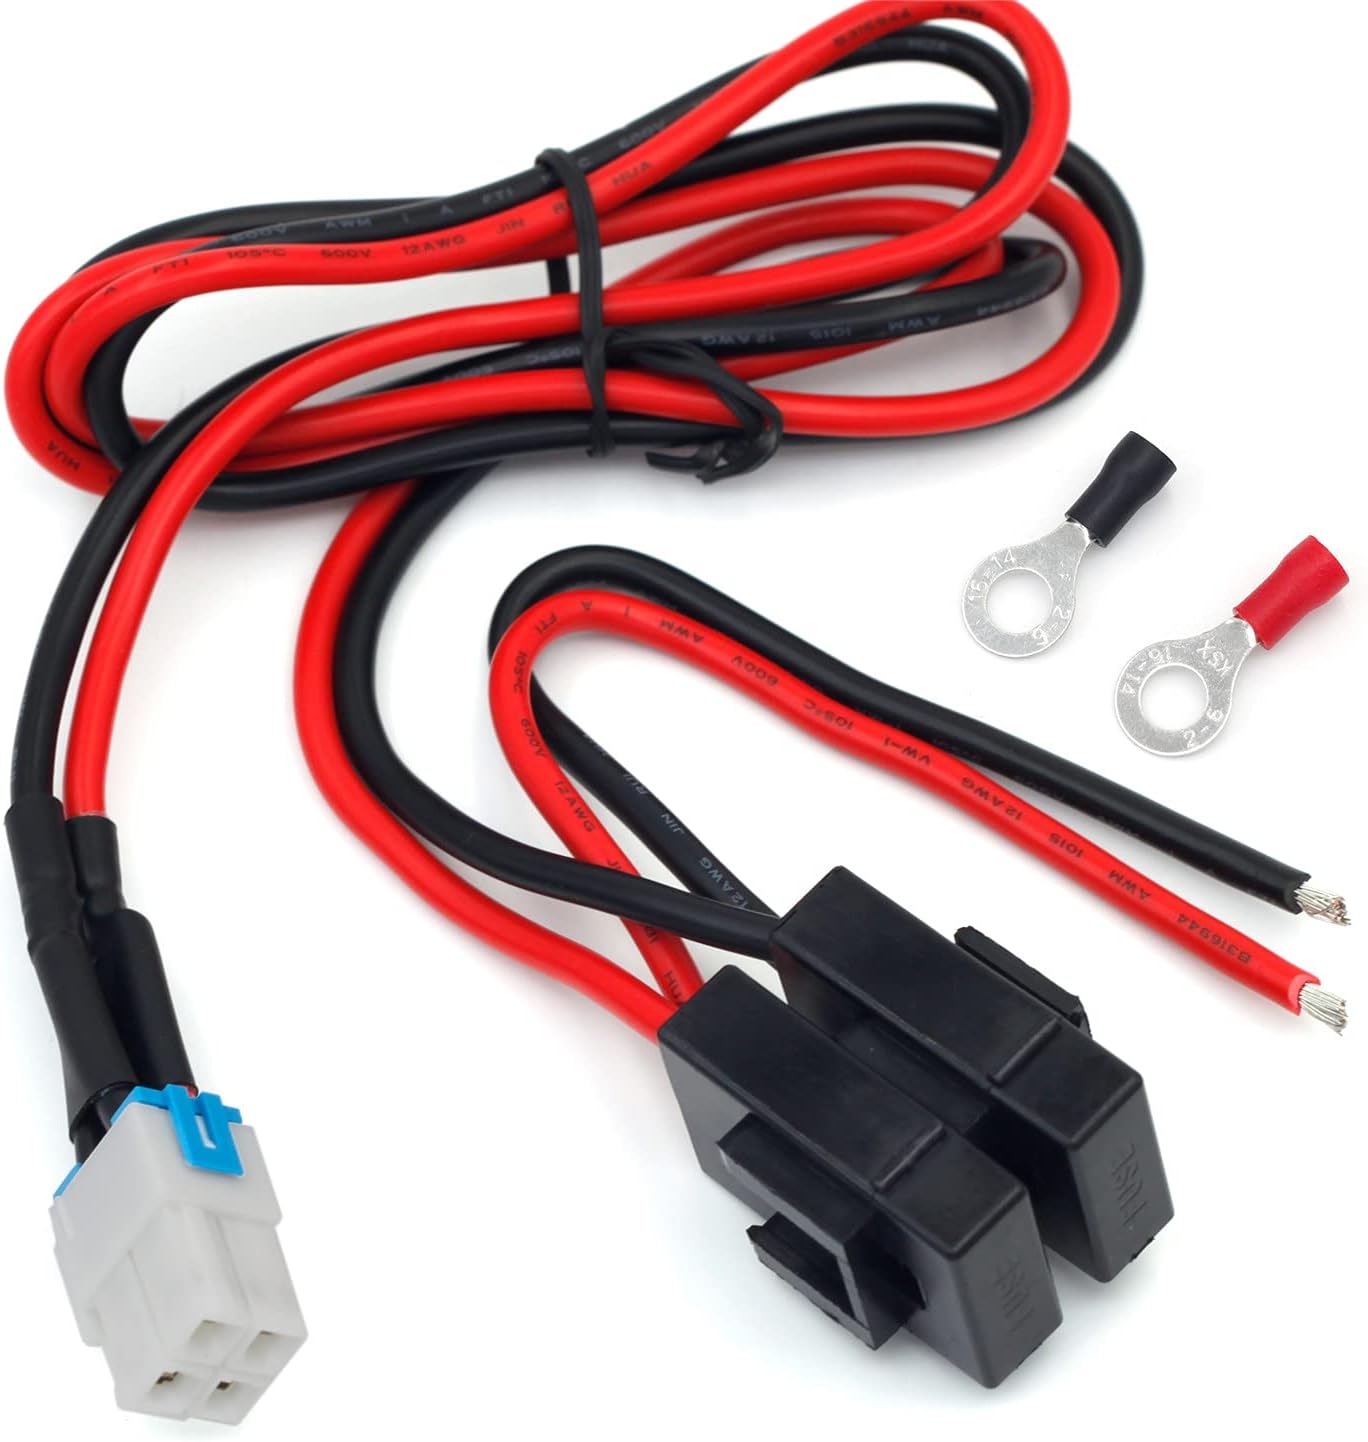 Thick High Quality Power Cable For Yaesu FT-891